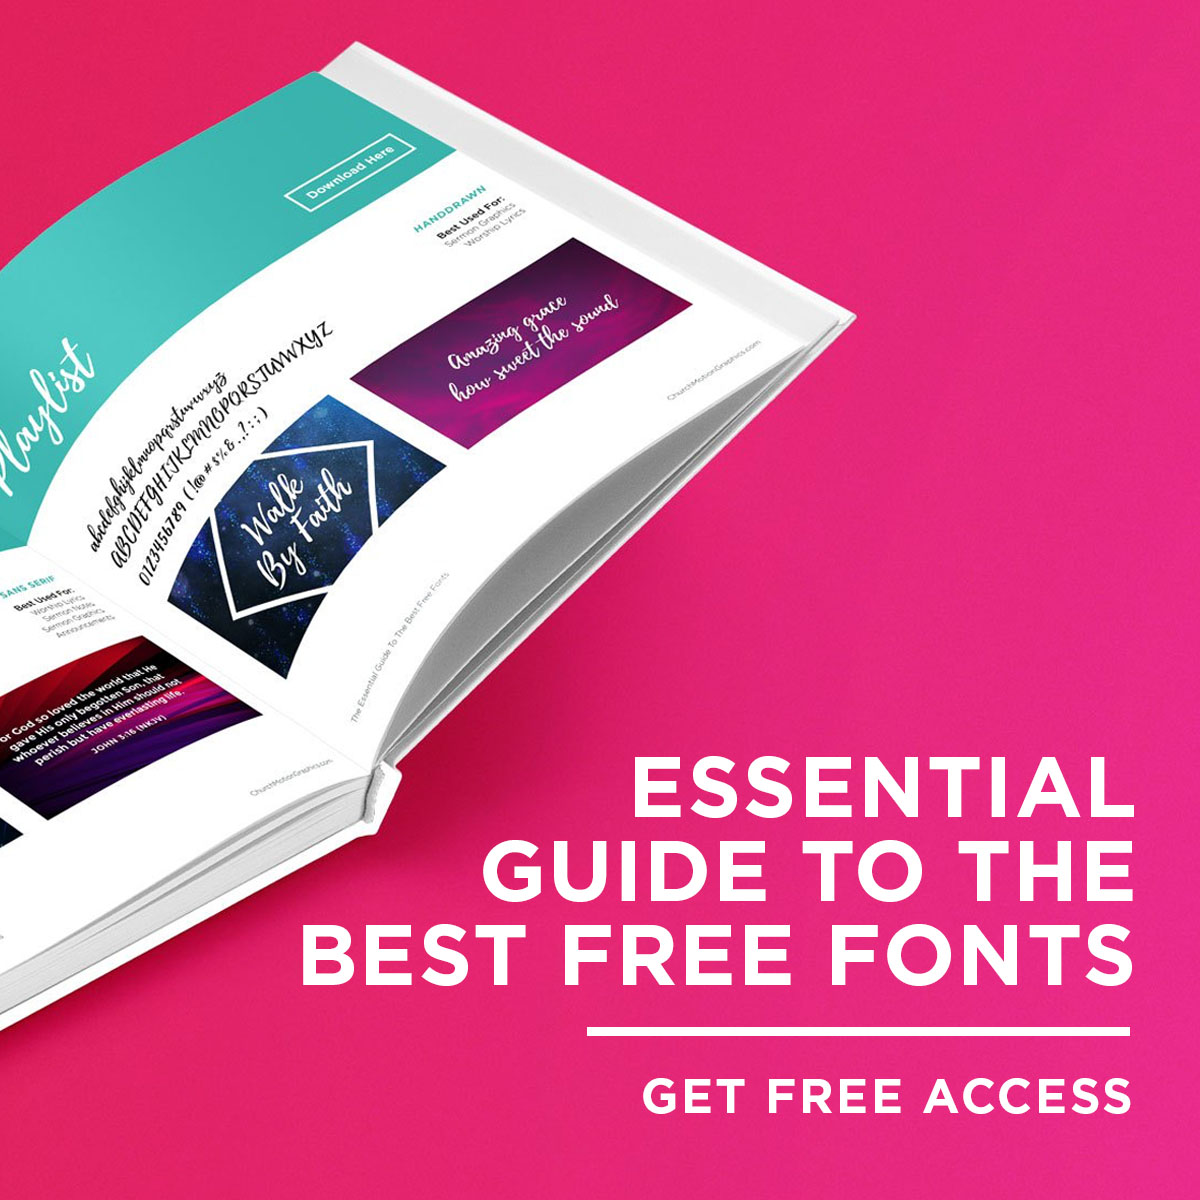 The Essential Guide To The Best Free Fonts